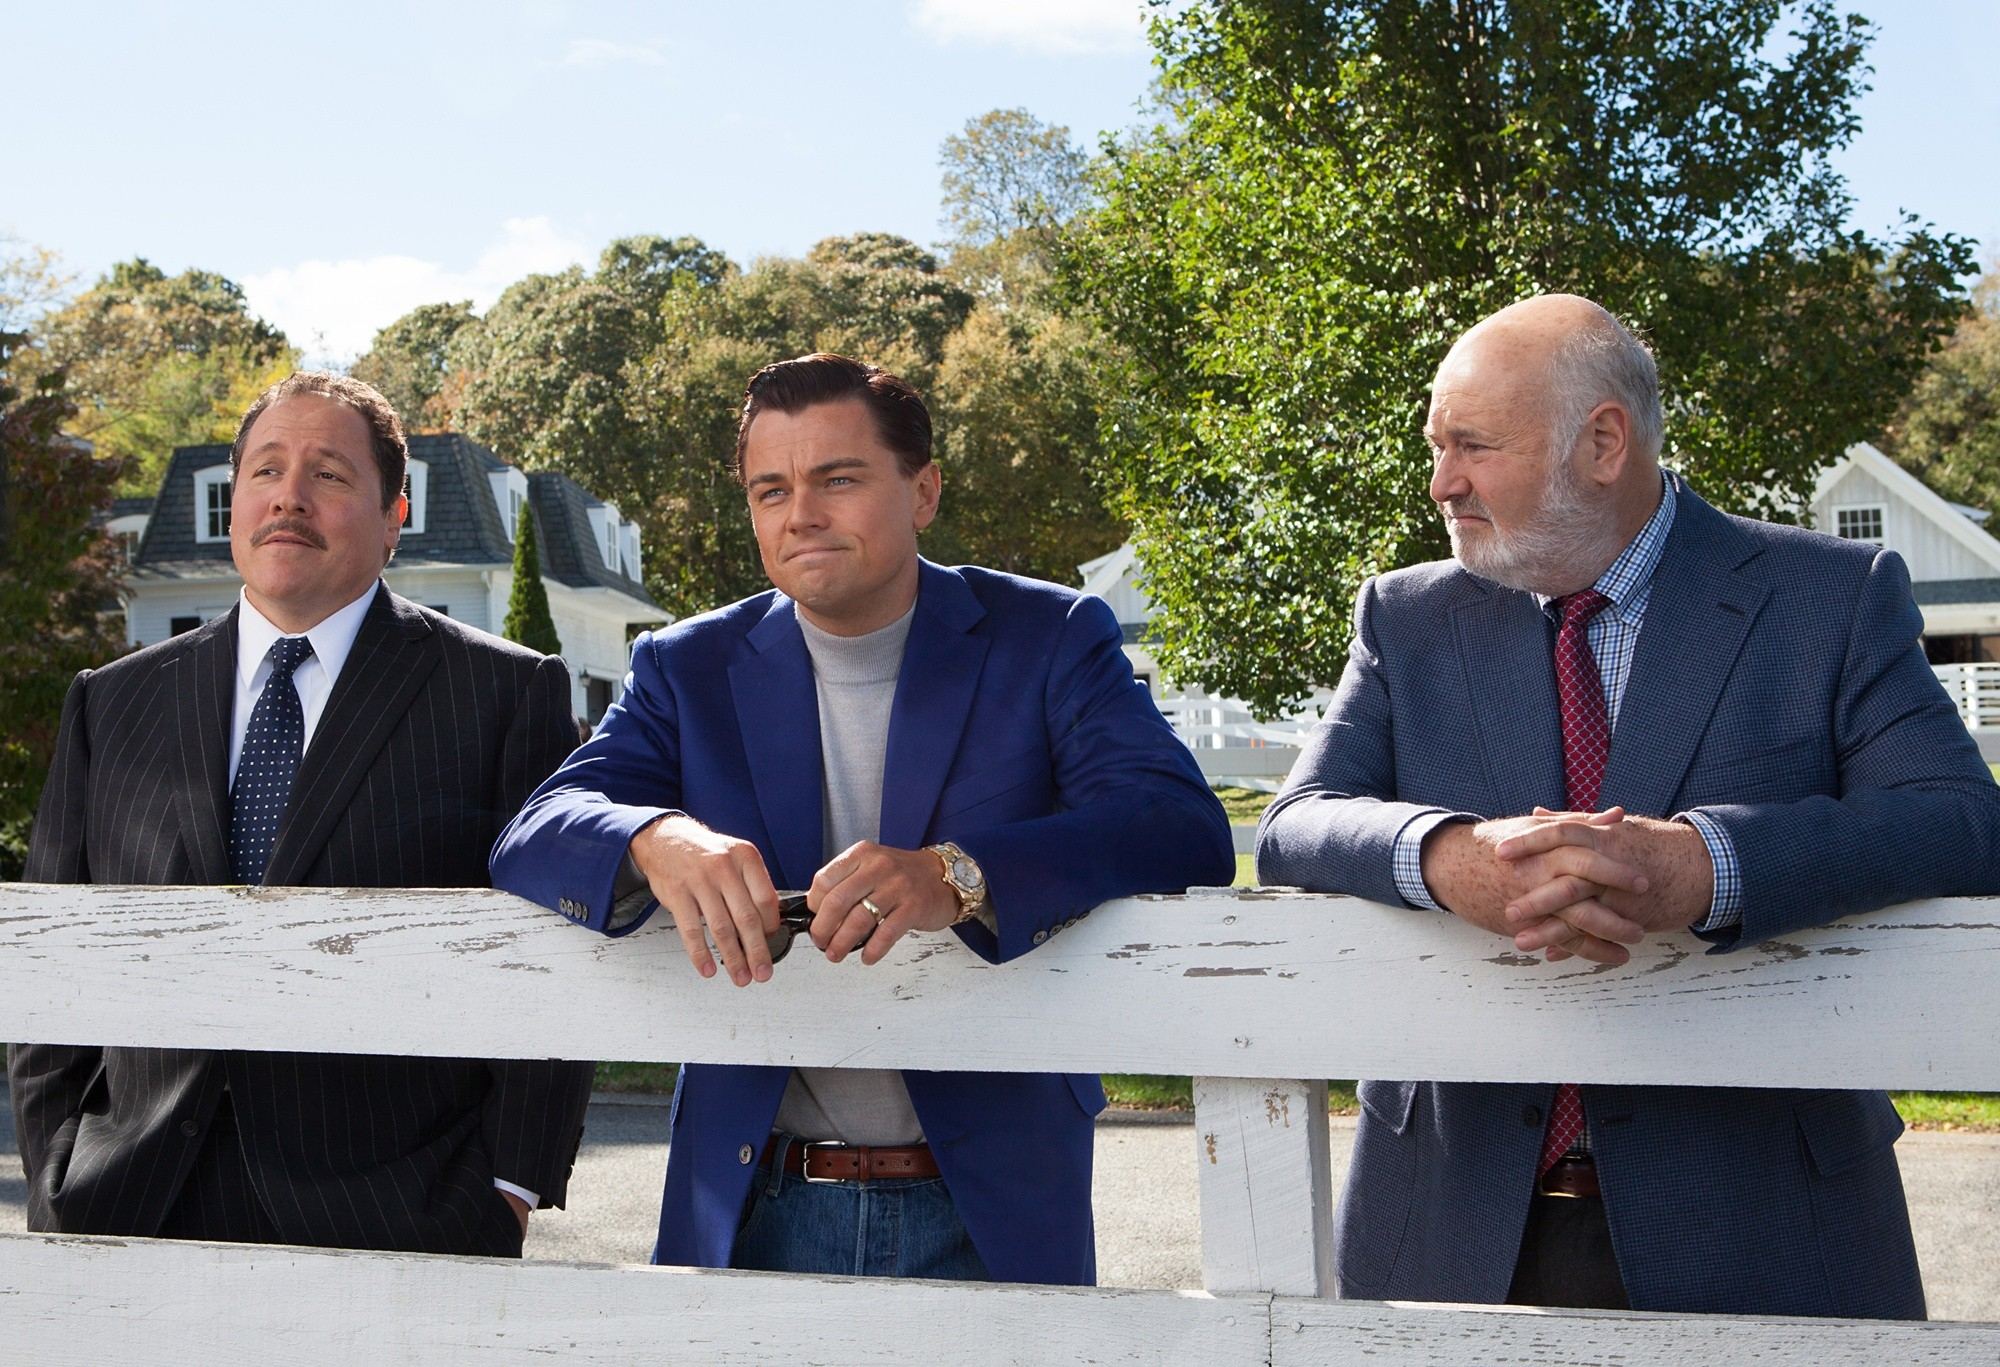 Jon Favreau, Leonardo DiCaprio and Rob Reiner in Paramount Pictures' The Wolf of Wall Street (2013)